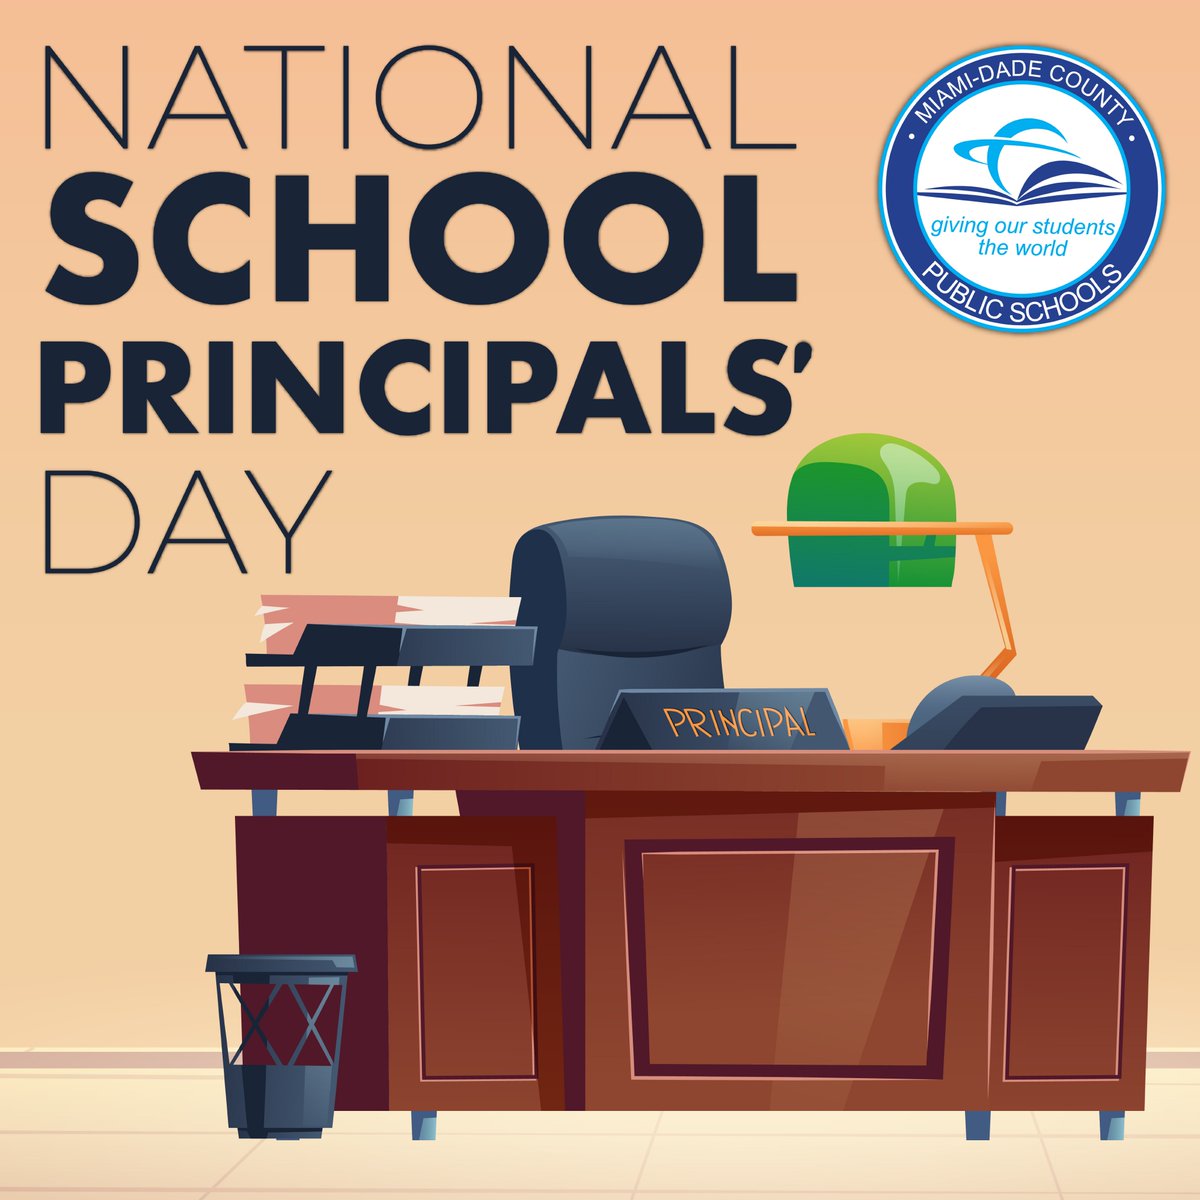 During National School Principals' Day, @MDCPS recognizes our dedicated school principals for their leadership, vision, and commitment to student success. Thank you for inspiring a love of learning and guiding our community towards excellence. #ThankAPrincipal…